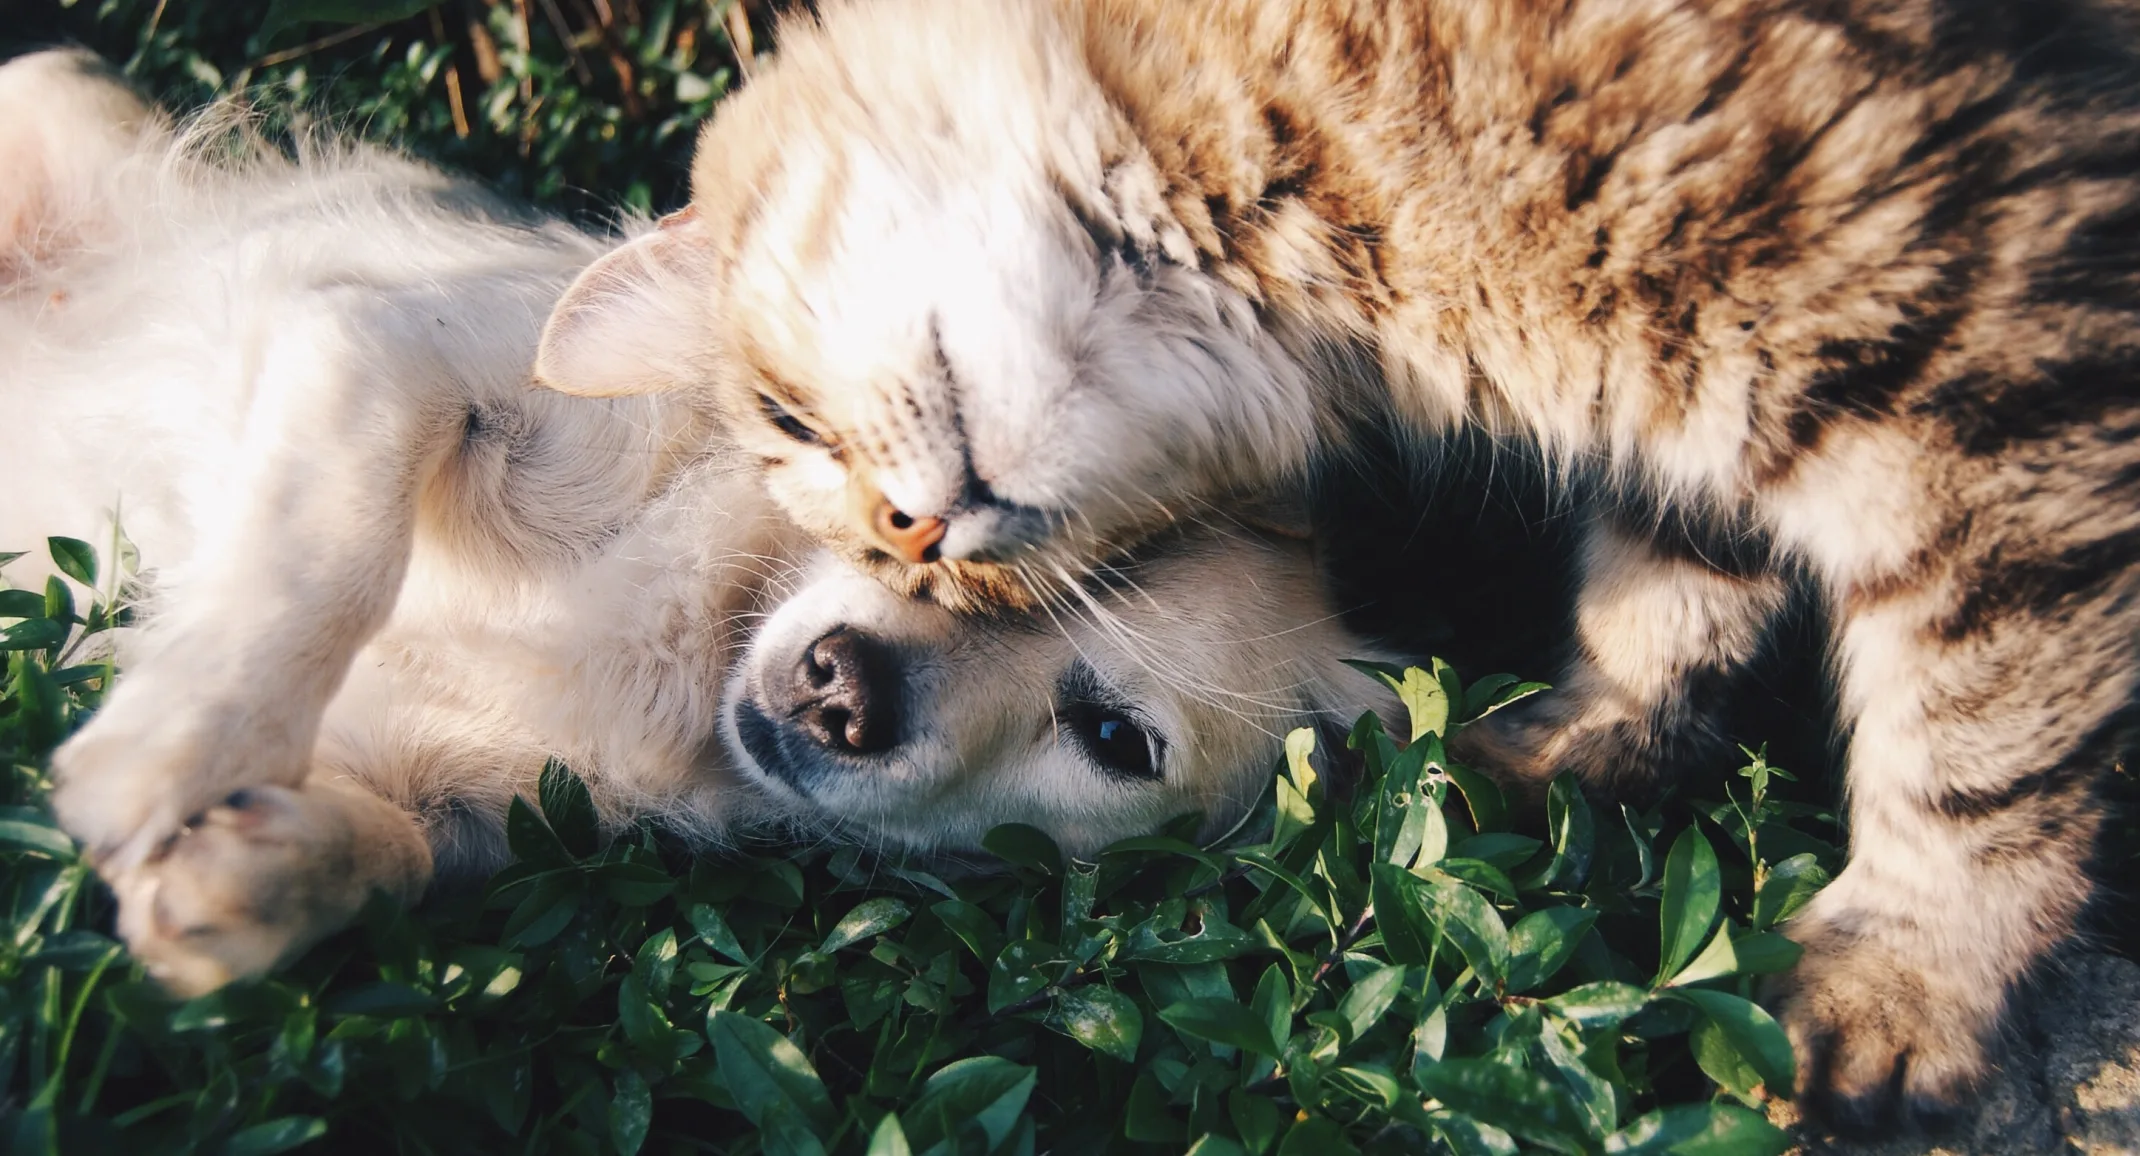 Dog and cat snuggling in the grass.